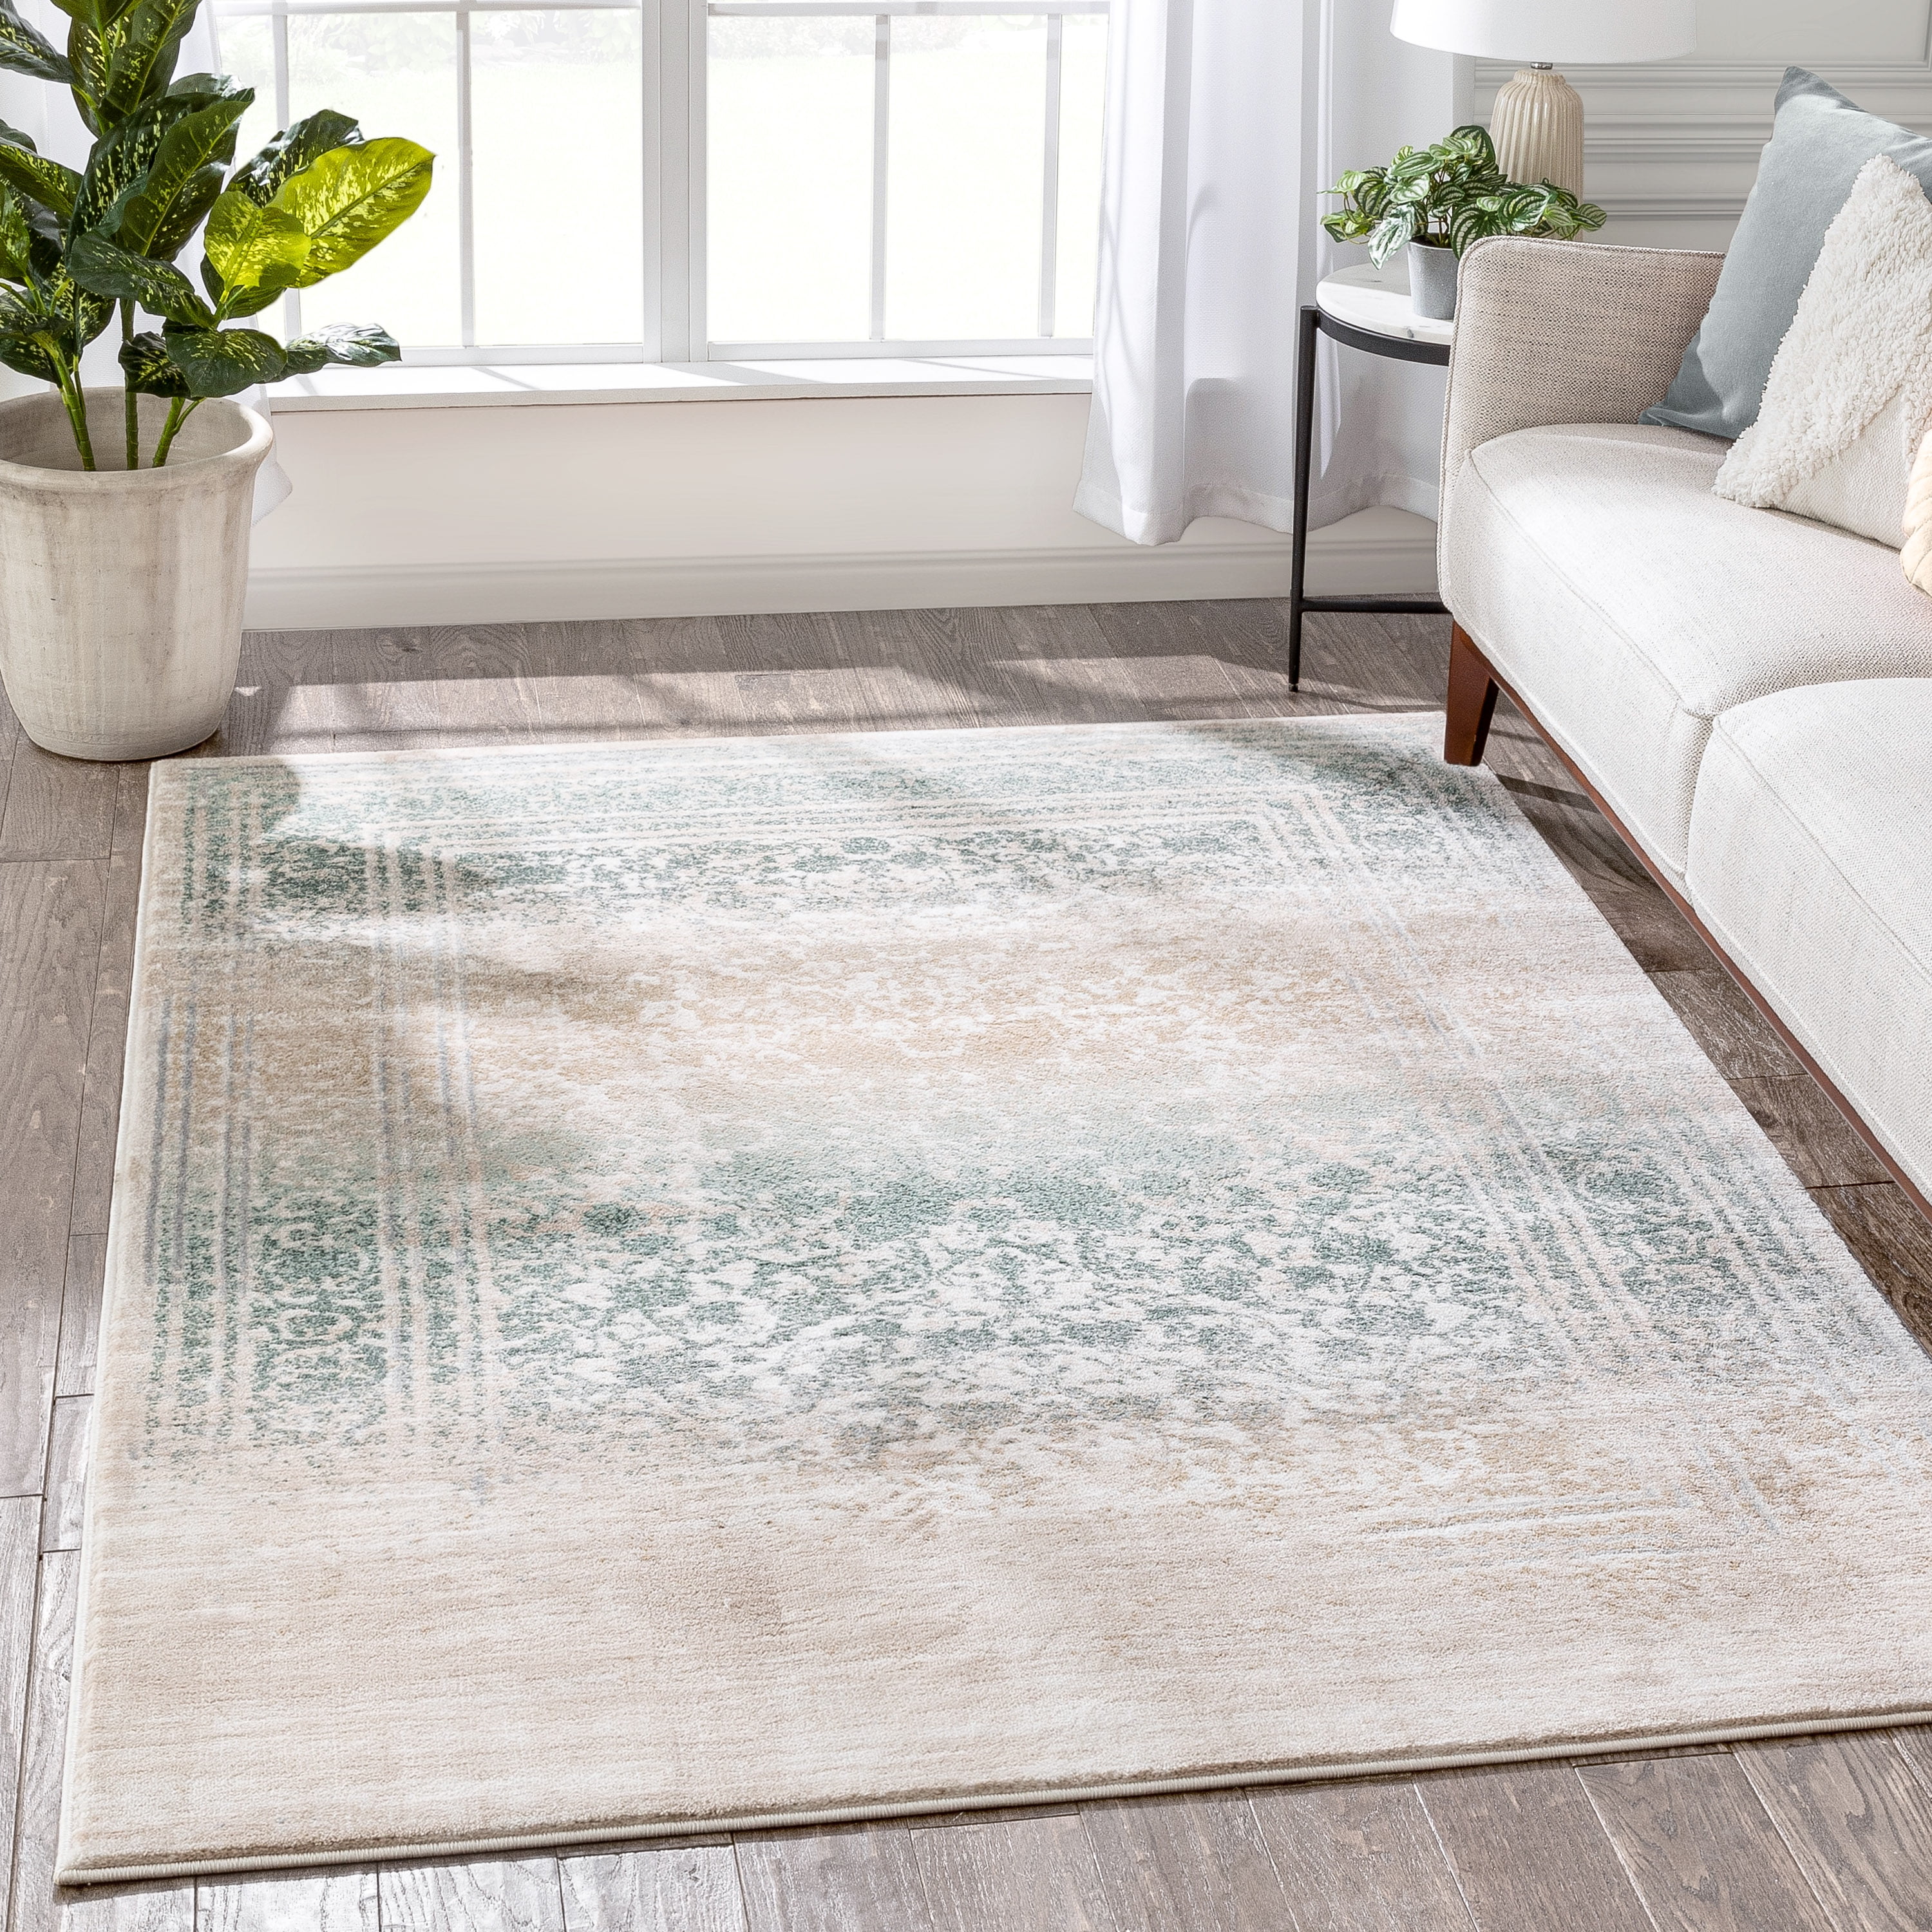 Low Pile Vintage Rug for Living Room Antiqued Effect Rugs Easy Care Area Rugs UK